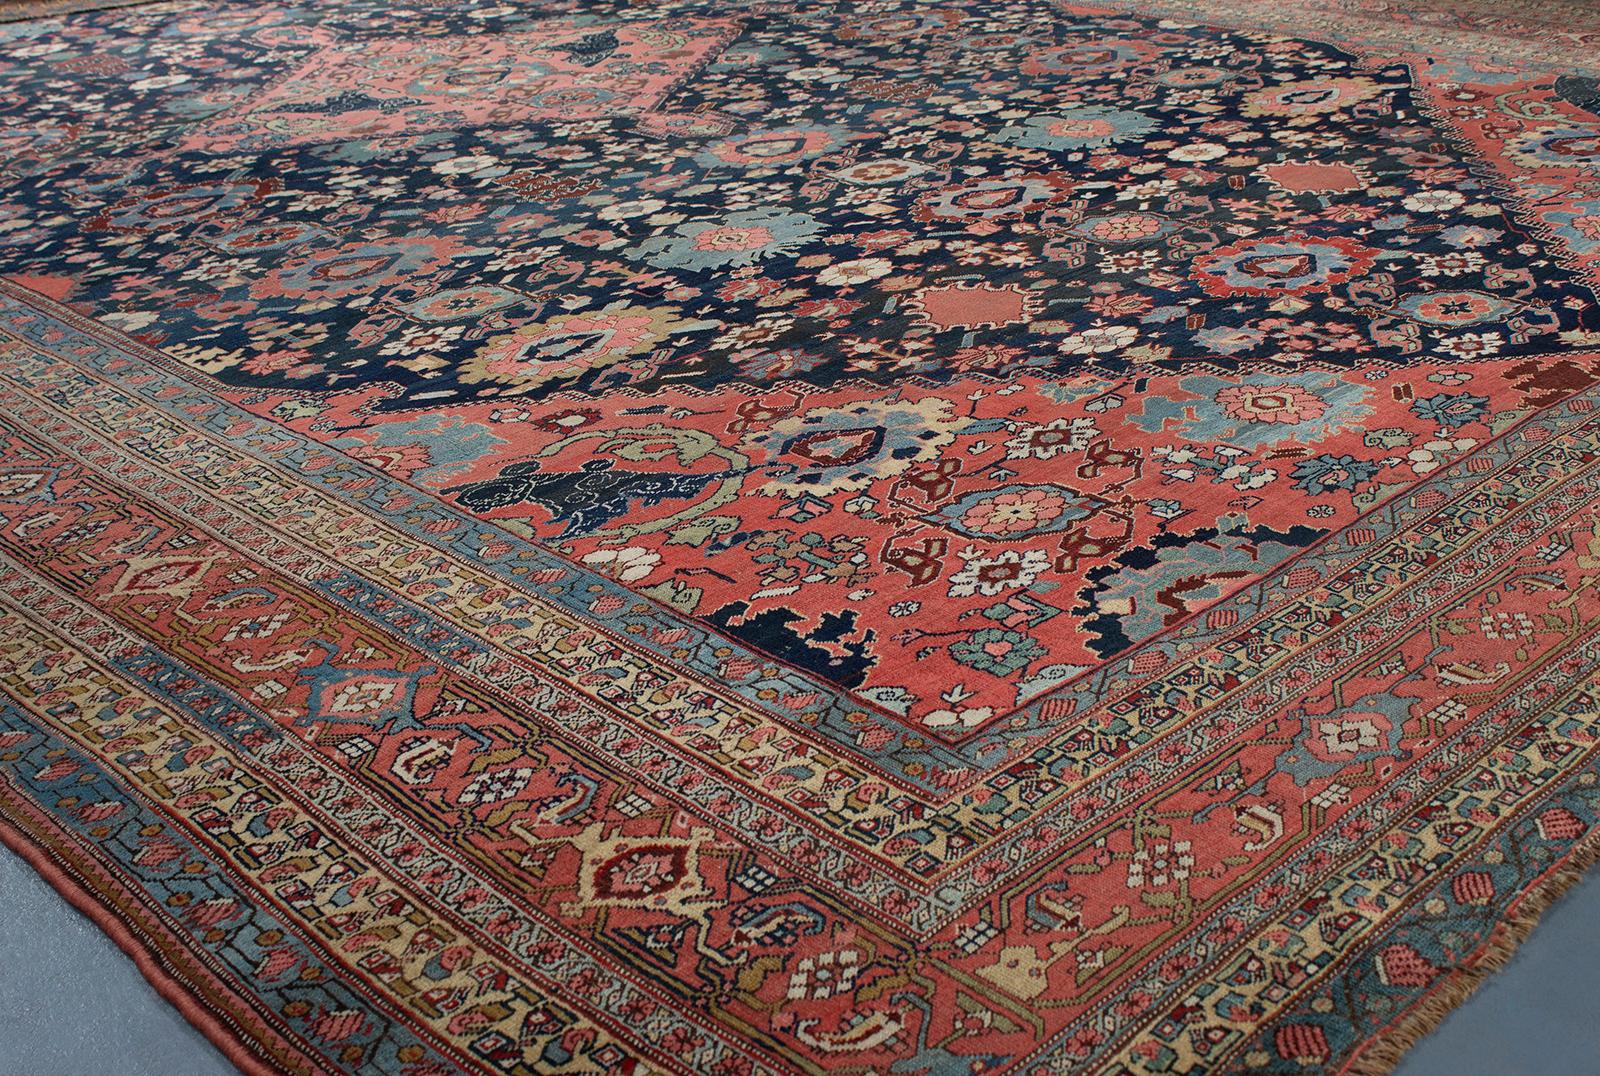 Bidjar carpets originated in a small city of the same name in Northwestern Iran. At the time, Bidjar was the center of a major weaving area populated mainly by Kurdish people whose artistic culture is clearly seen in the region’s grand antique